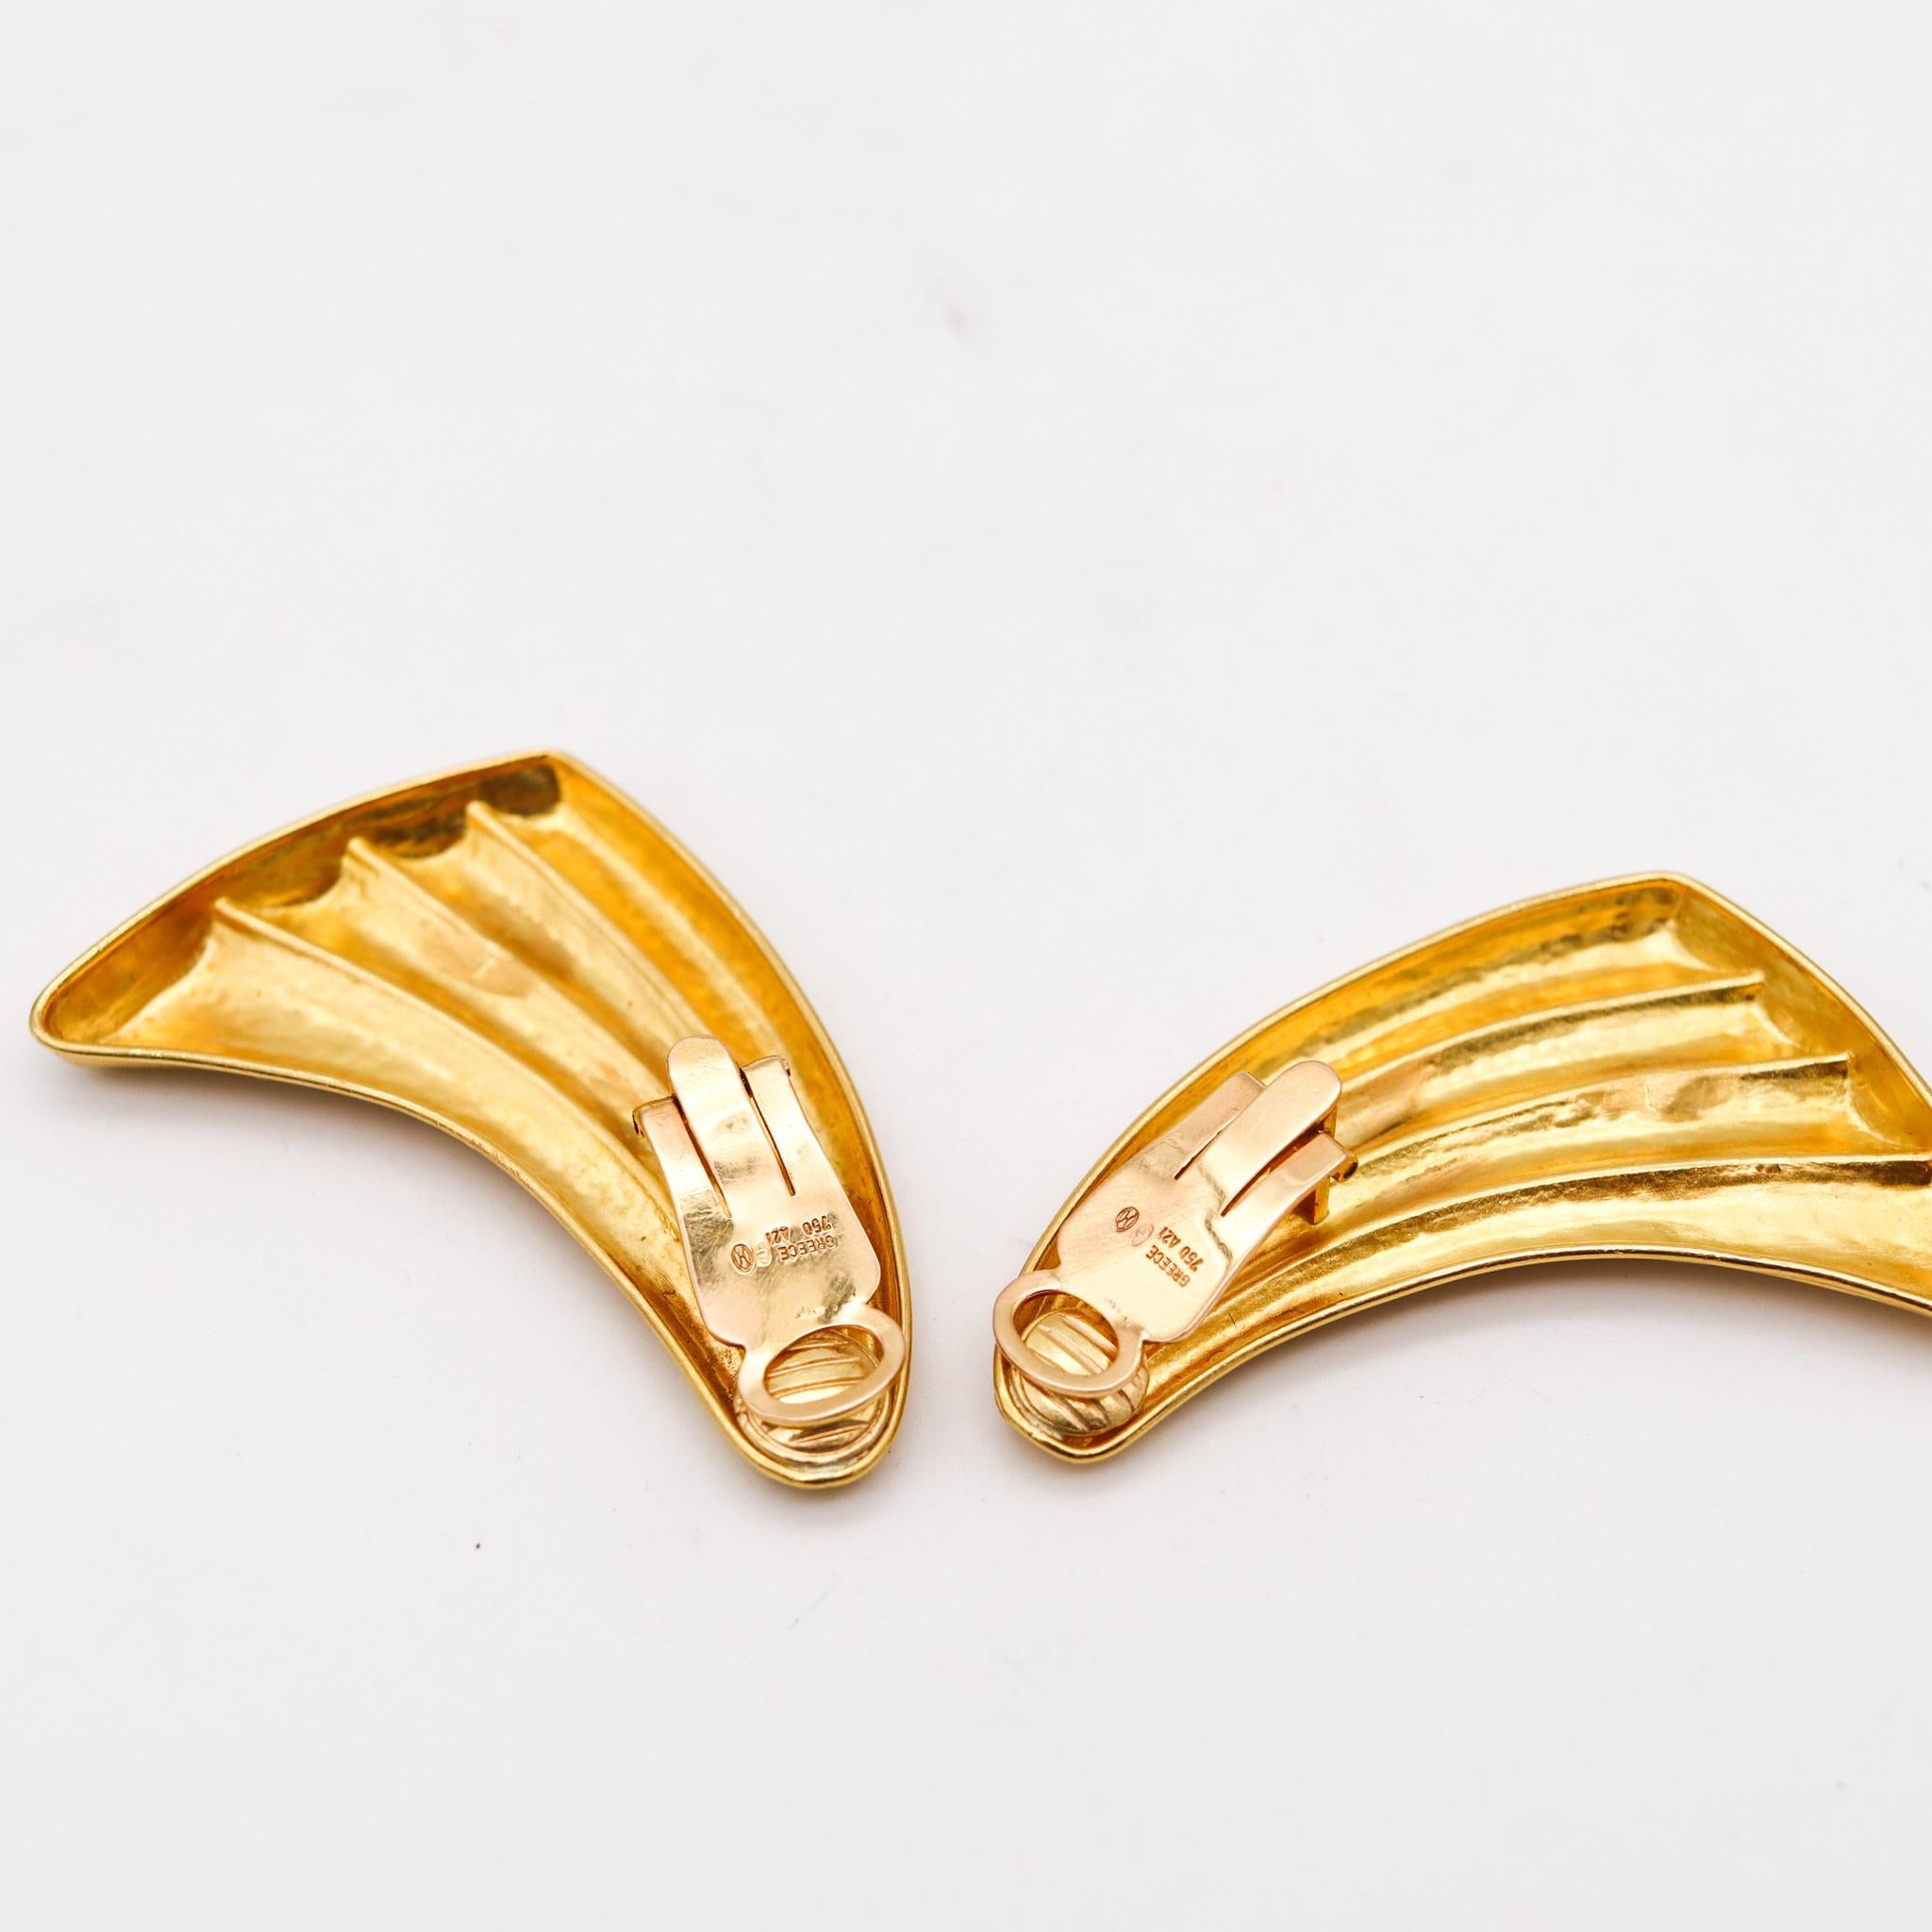 Greek Revival Lalaounis 1970 the Dawn of Art Clips on Earrings in Hammered 18kt Yellow Gold For Sale